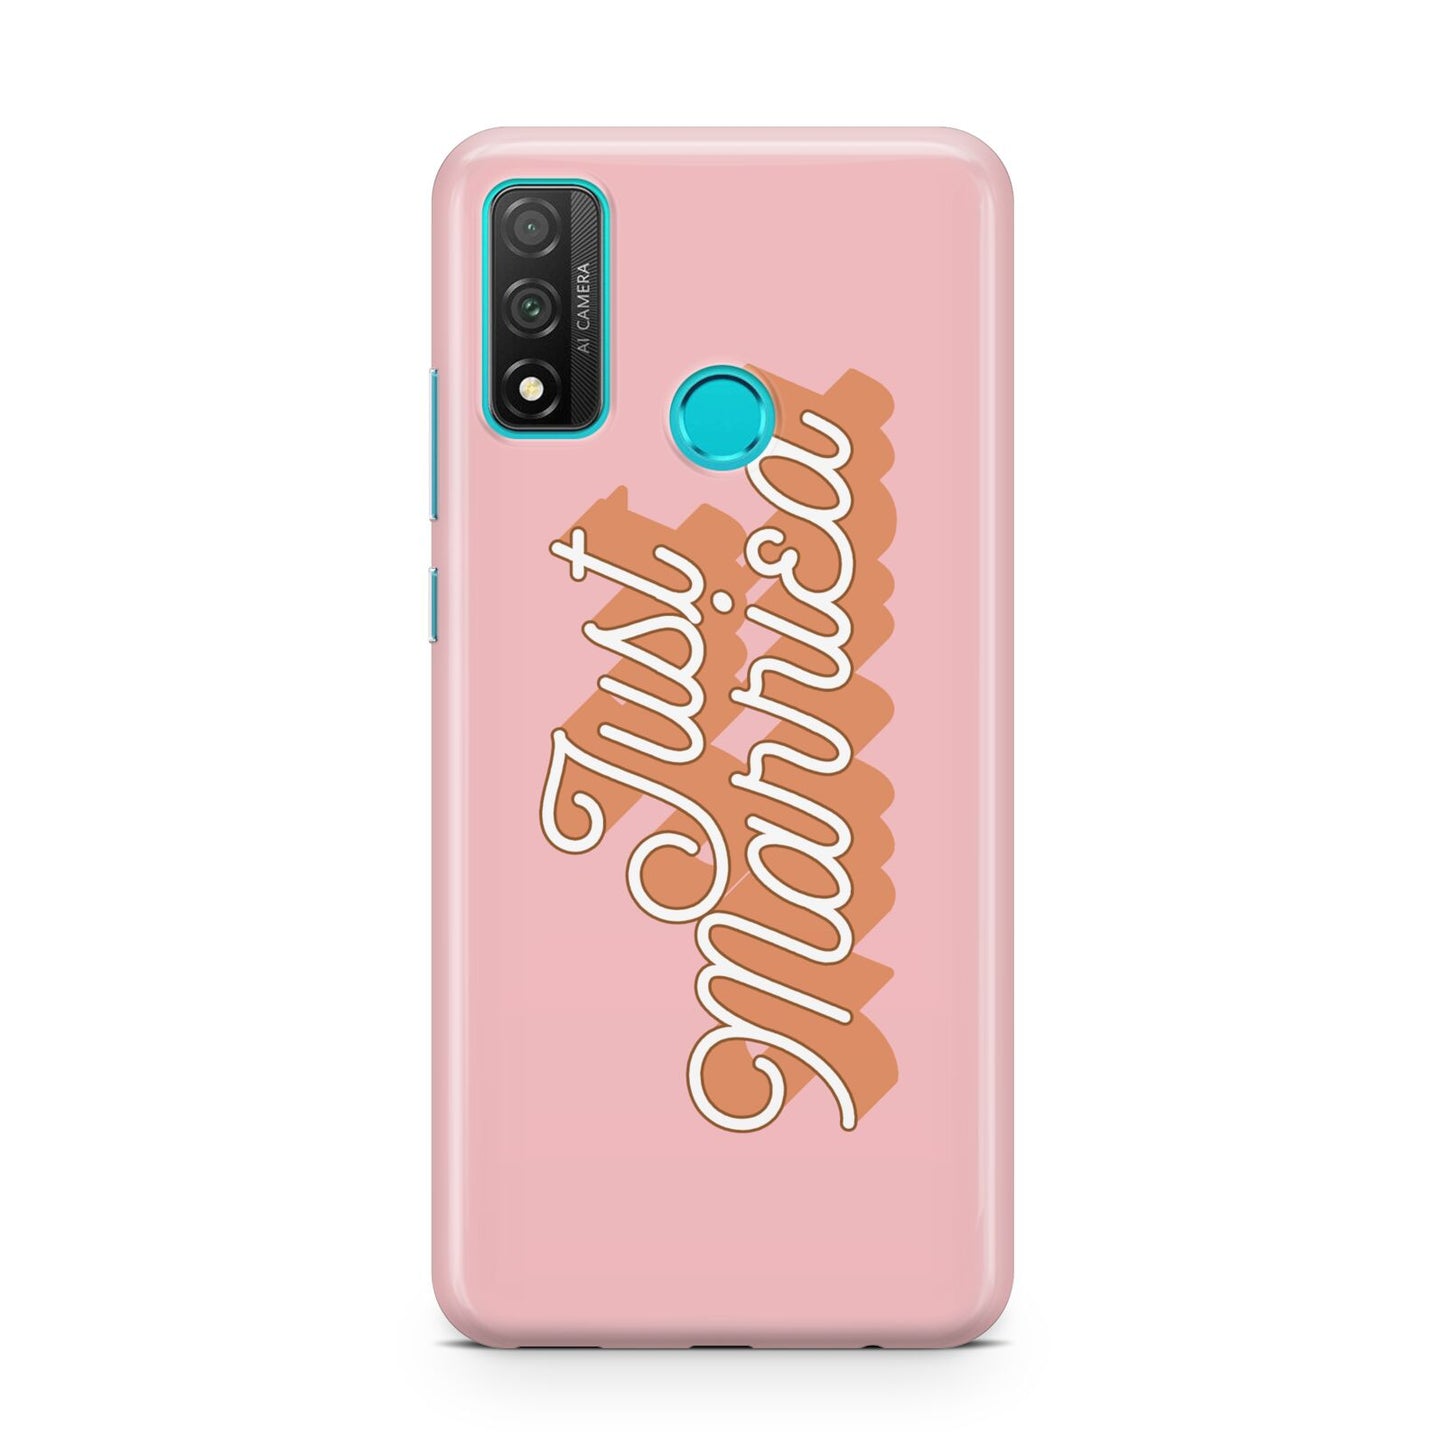 Just Married Pink Huawei P Smart 2020